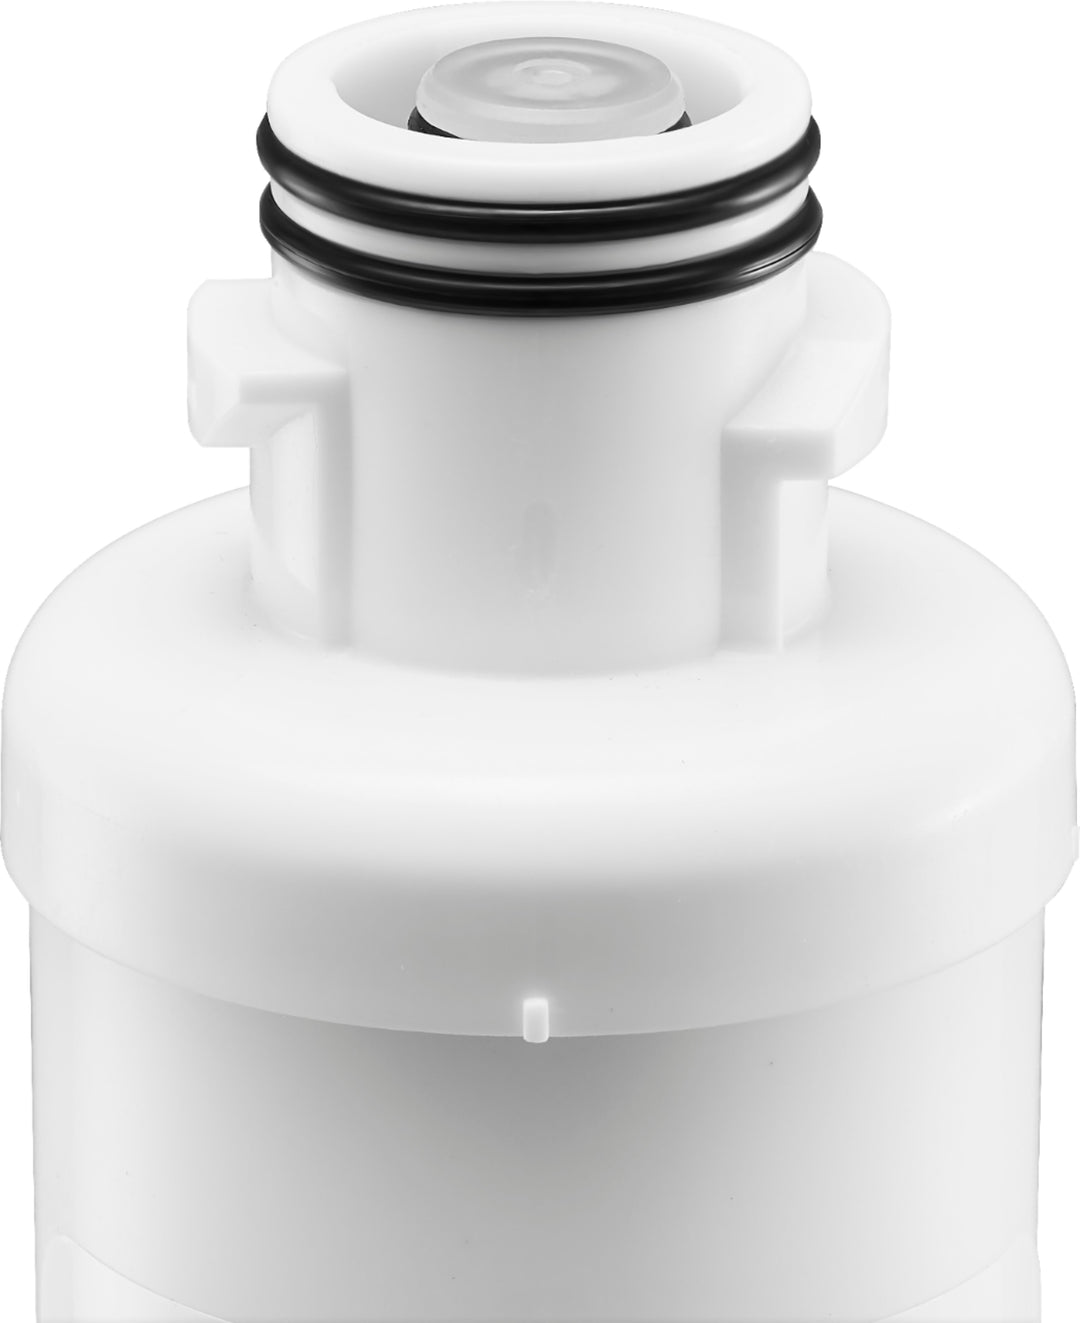 Insignia™ - NSF 53 Water Filter Replacement for Select Insignia Side-by-Side Refrigerators - White_4